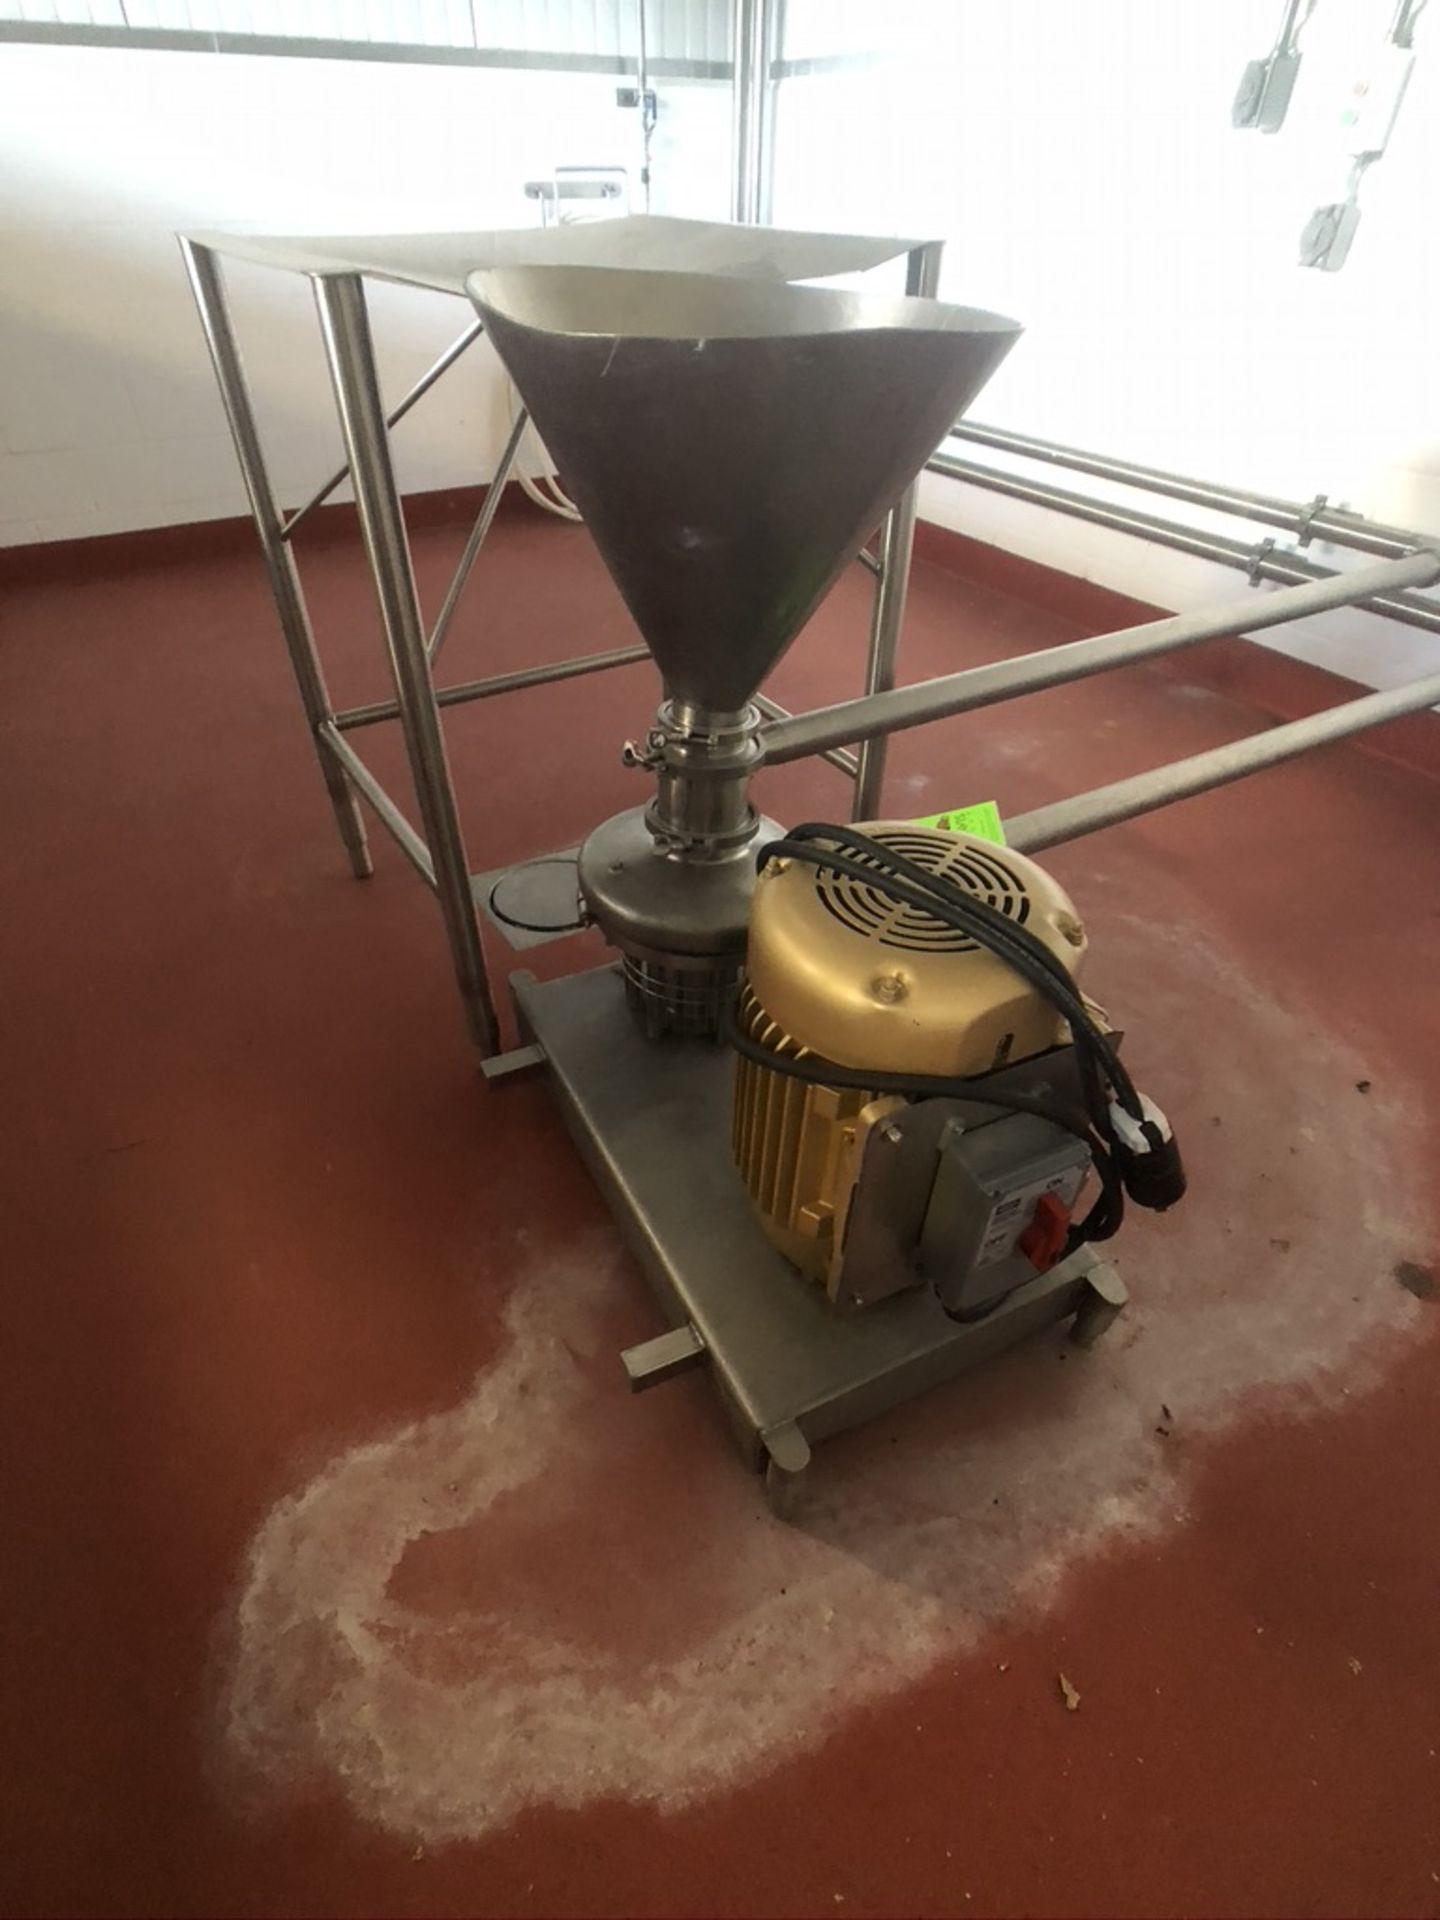 TRI-CLOVER / TRI-BLENDER, MODEL F4329MD-B40, S/N W2229, EQUIPPED WITH BALDOR MOTOR 20 HP 3520 RPM,